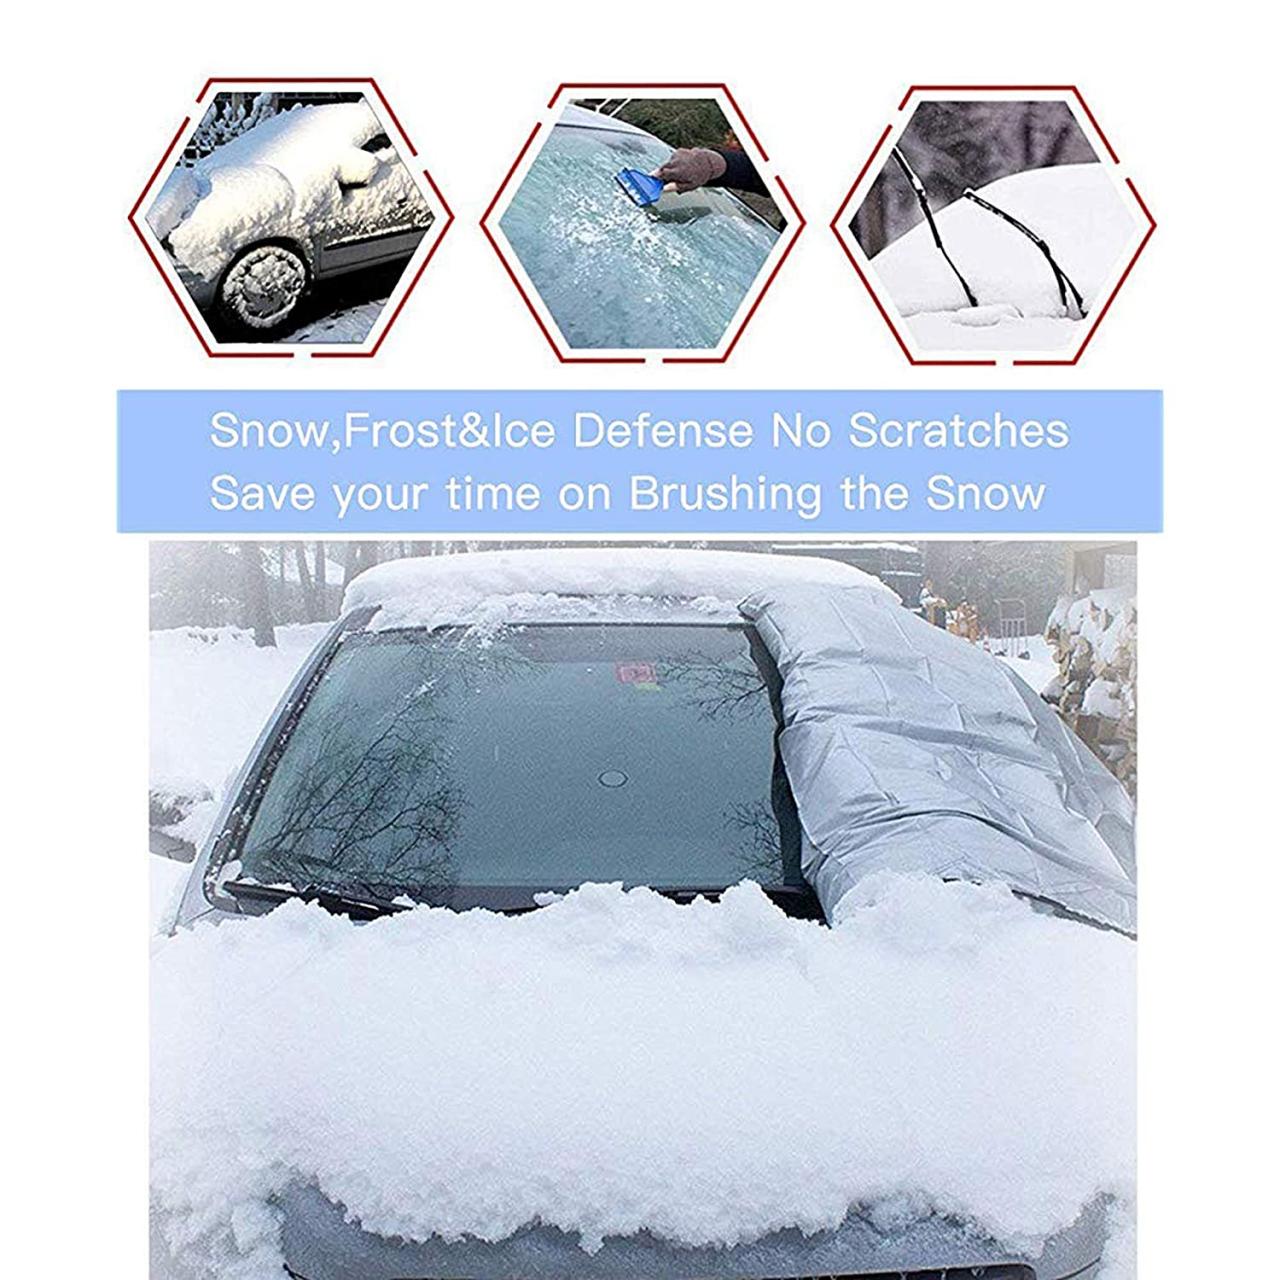 Keeps Ice & Snow Off Windshield Snow Ice Cover w Mirror Covers for Winter  Straps &Magnetic Fixed Design Windproof Outdoor Car Snow Covers Sunshade  Cover for Summer,Large Fits Any Car Truck SUV